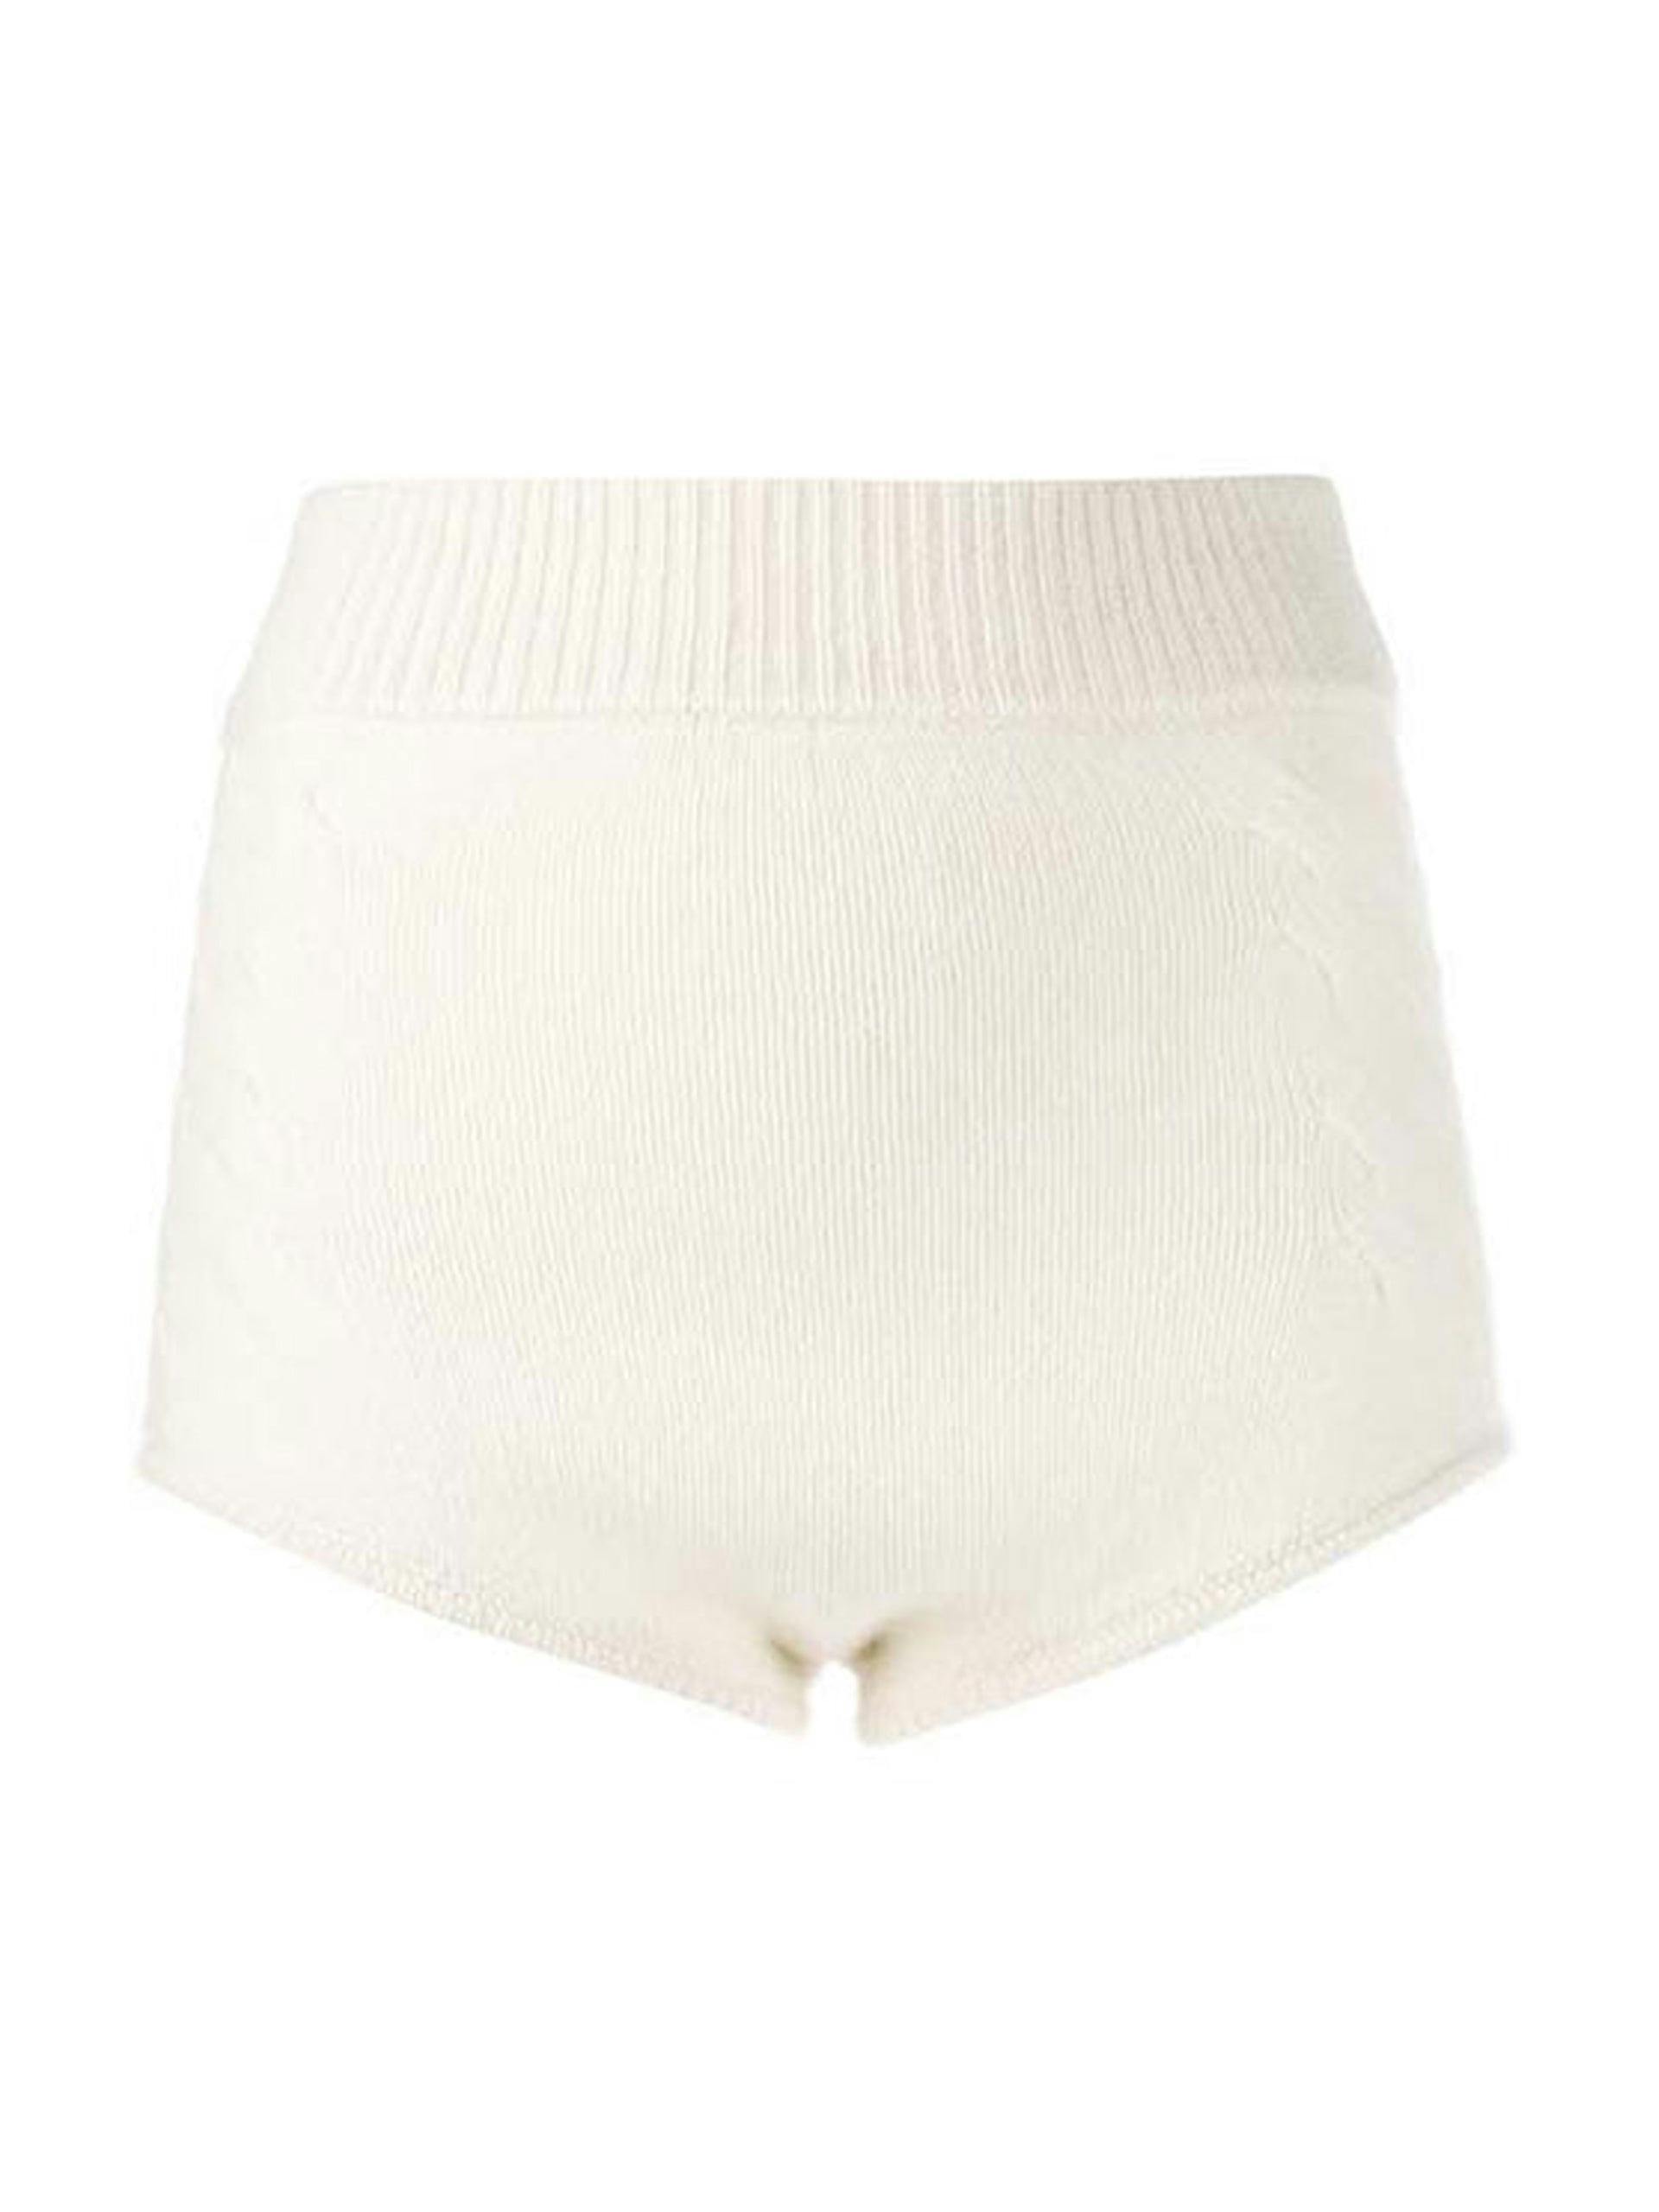 Mimie knitted knickers